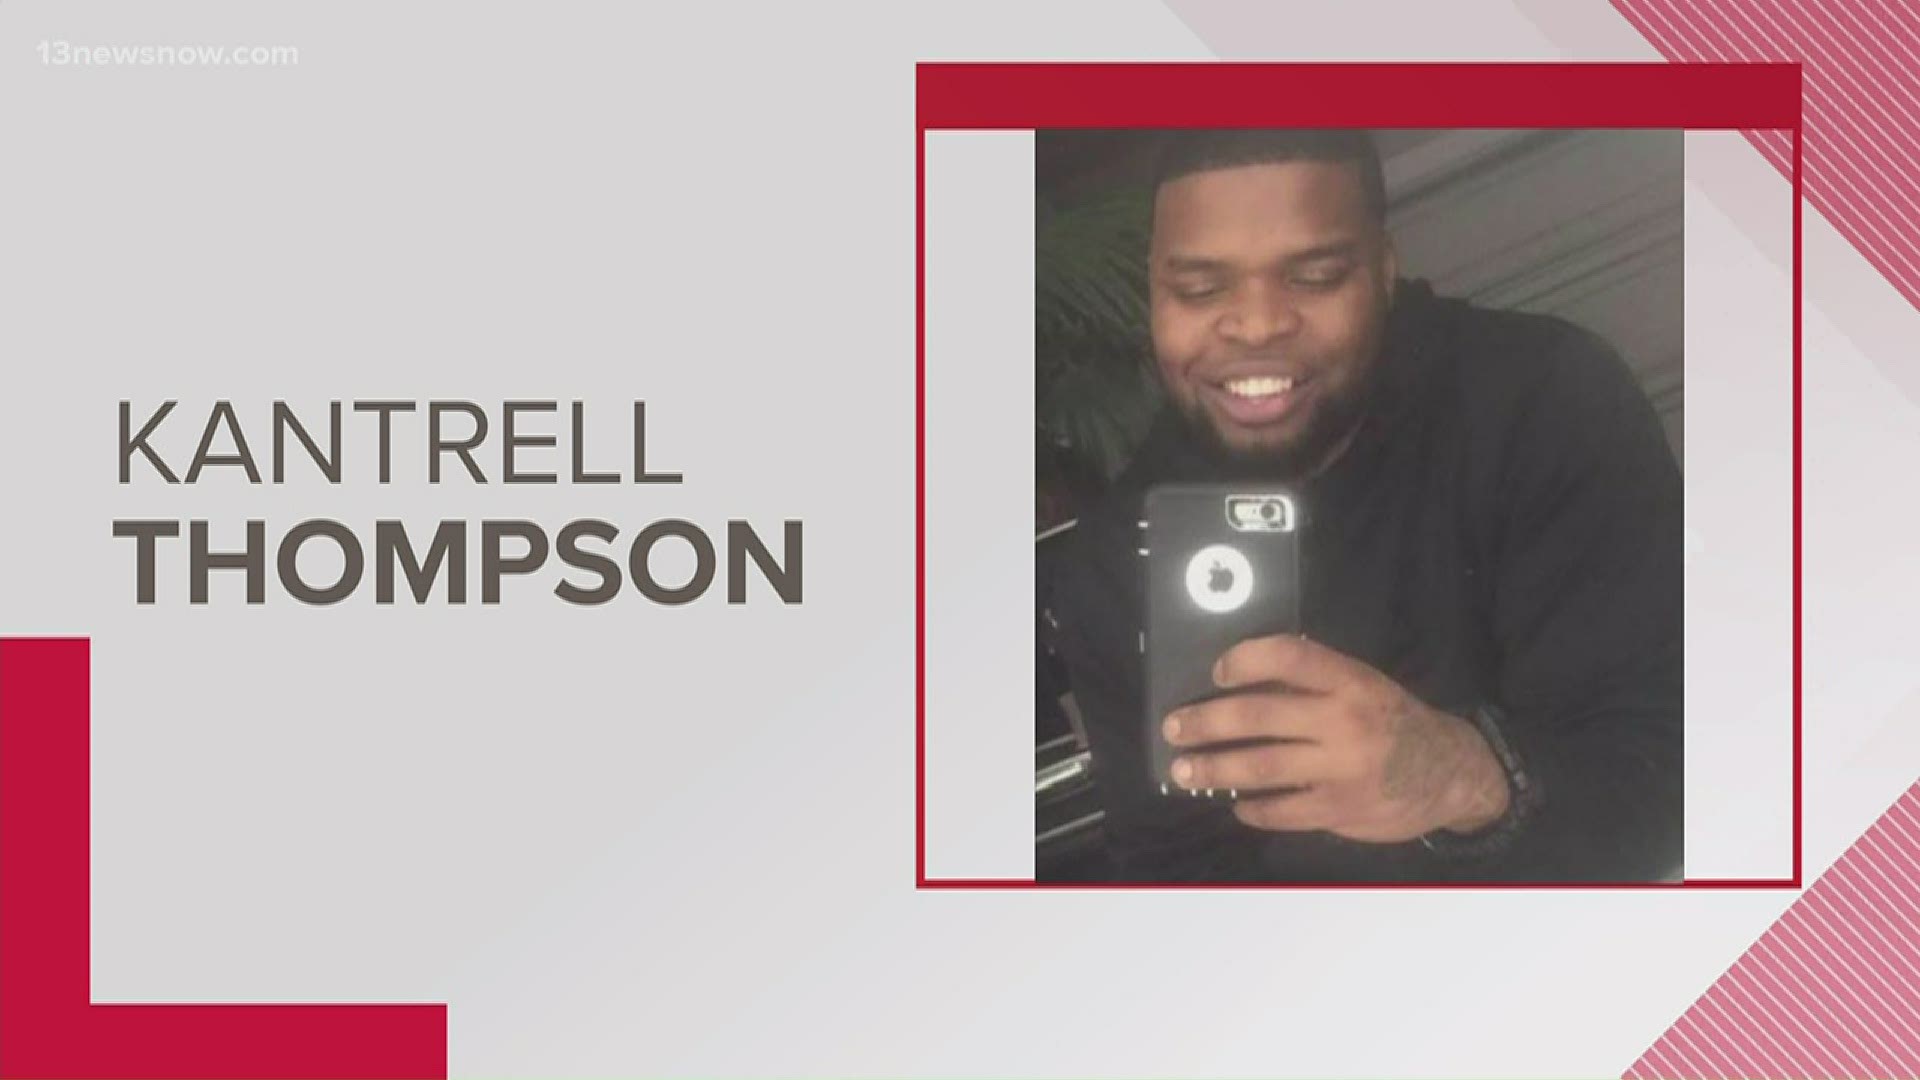 Police are looking for Kantrell Deshun Thompson, 28, who they believe was involved in a man's murder on Marcella Road in Hampton.